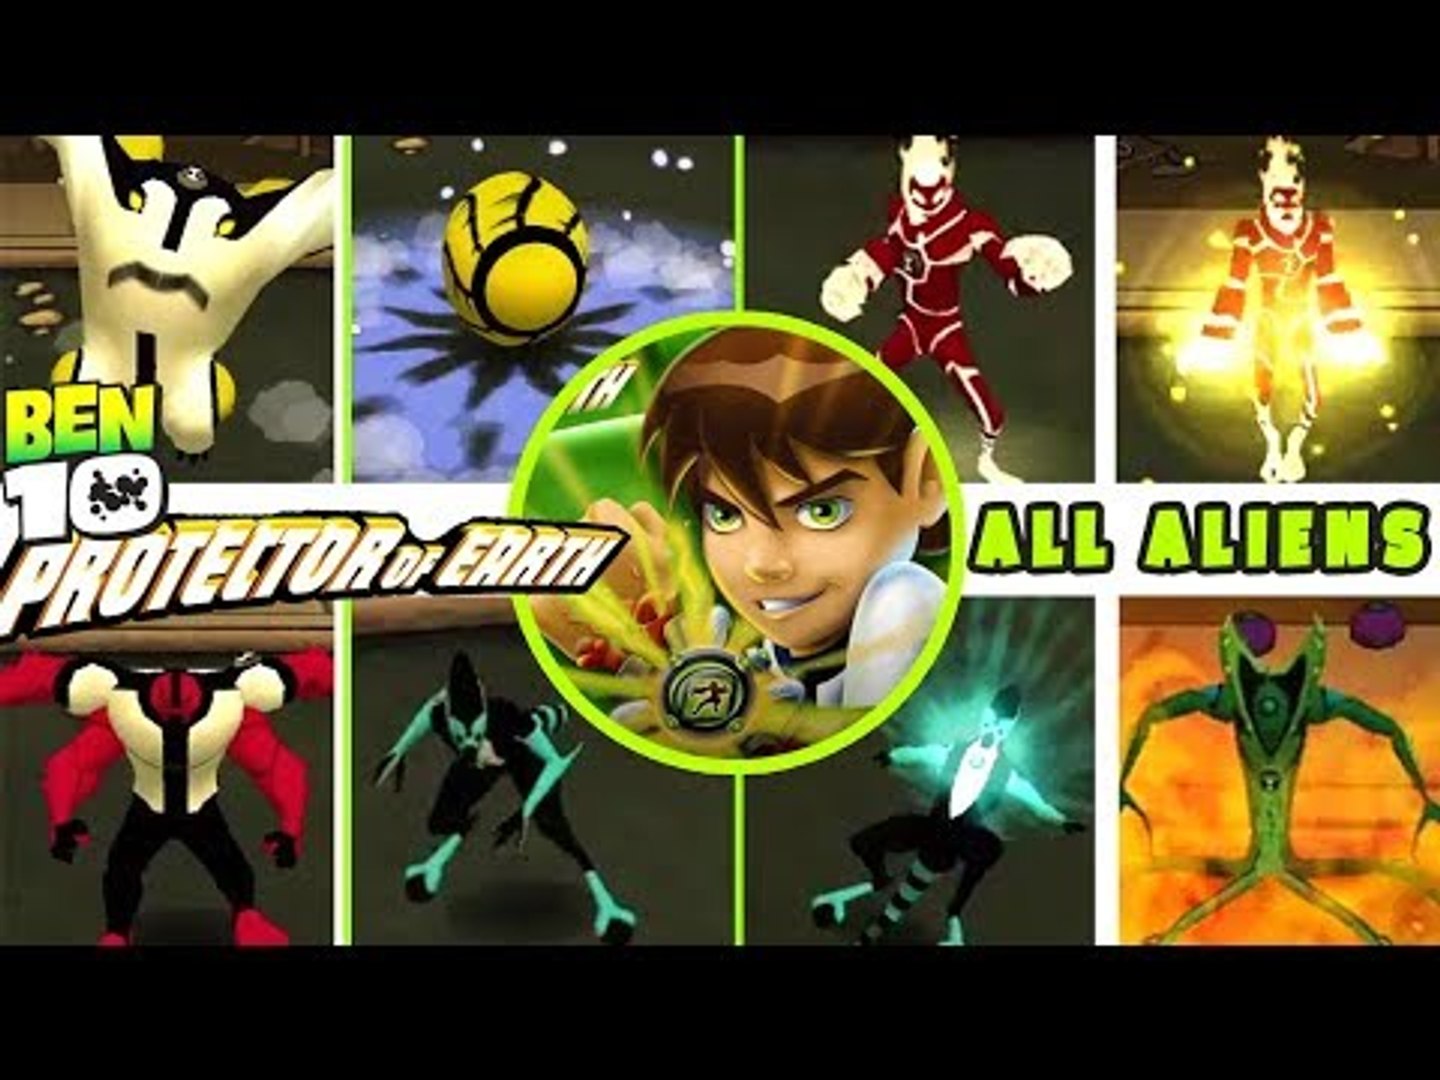 BEN 10 Protector of Earth ALL ALIENS + All Combos - video Dailymotion